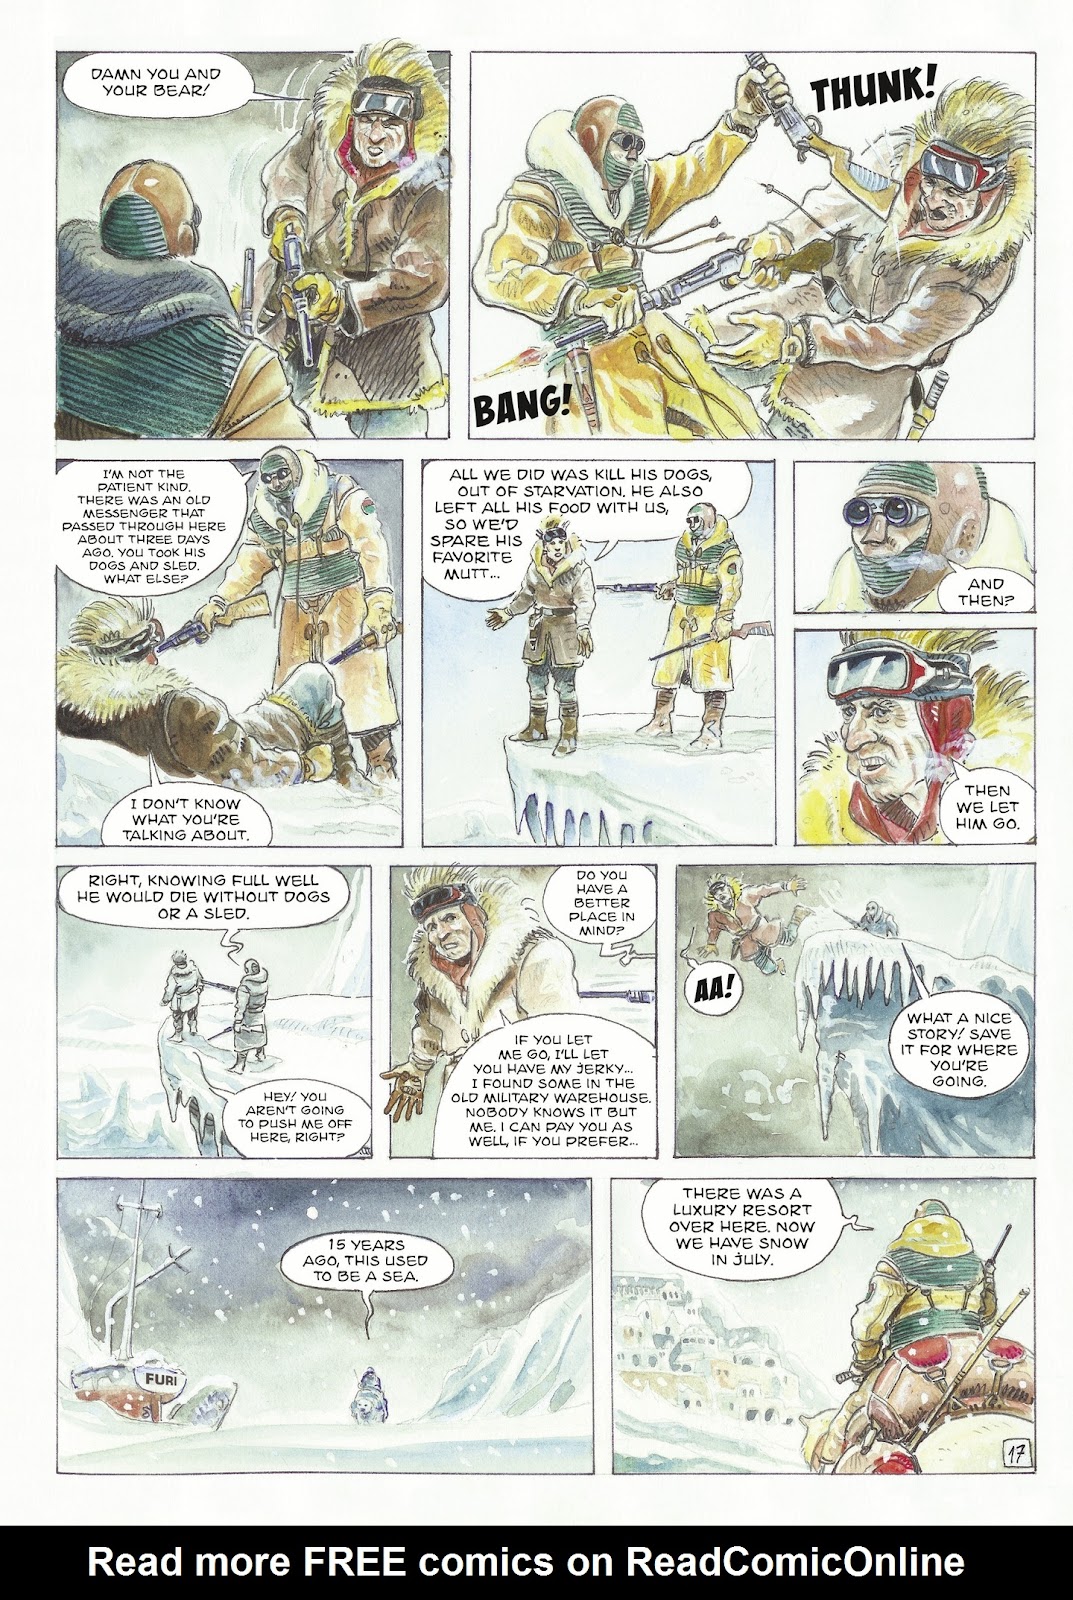 The Man With the Bear issue 1 - Page 19